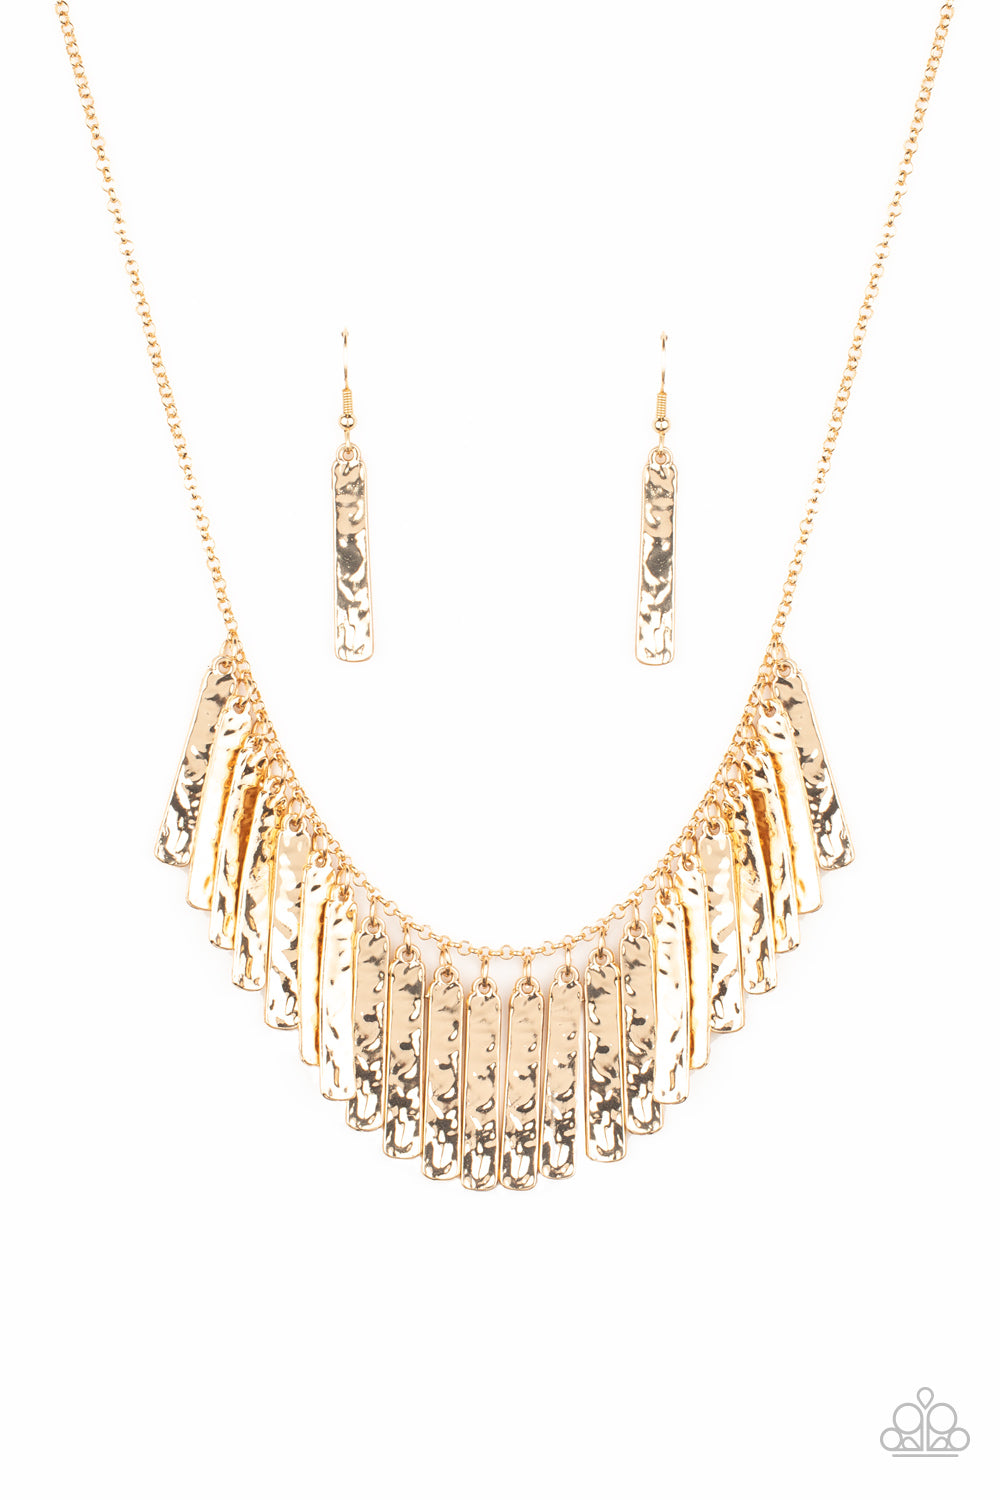 Paparazzi Accessories Metallic Muse - Gold Necklaces - Lady T Accessories